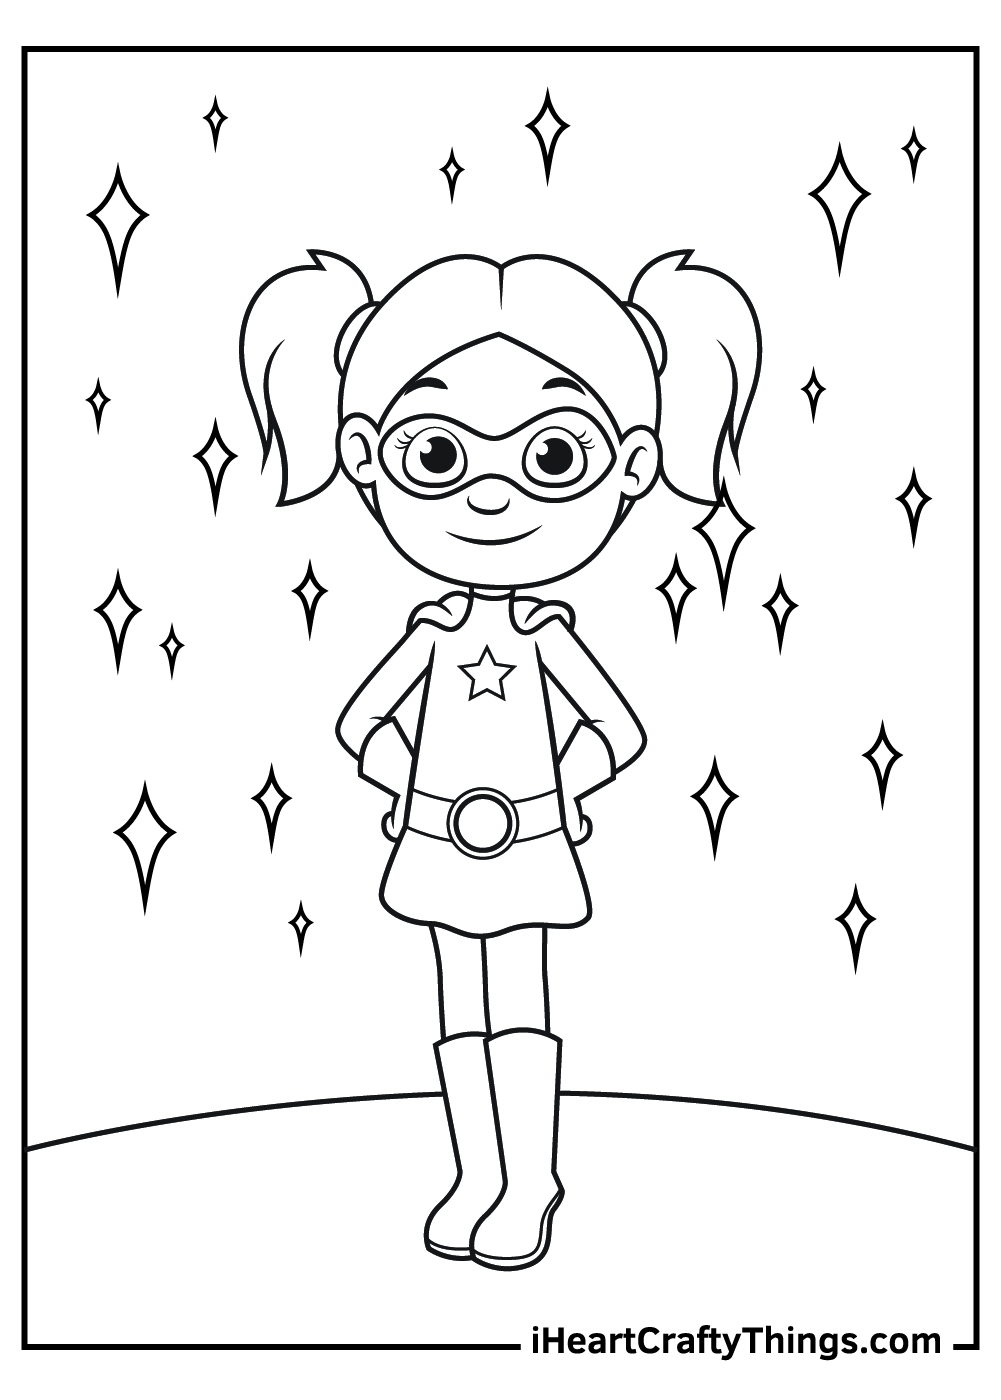 Superhero Coloring Pages Updated 20